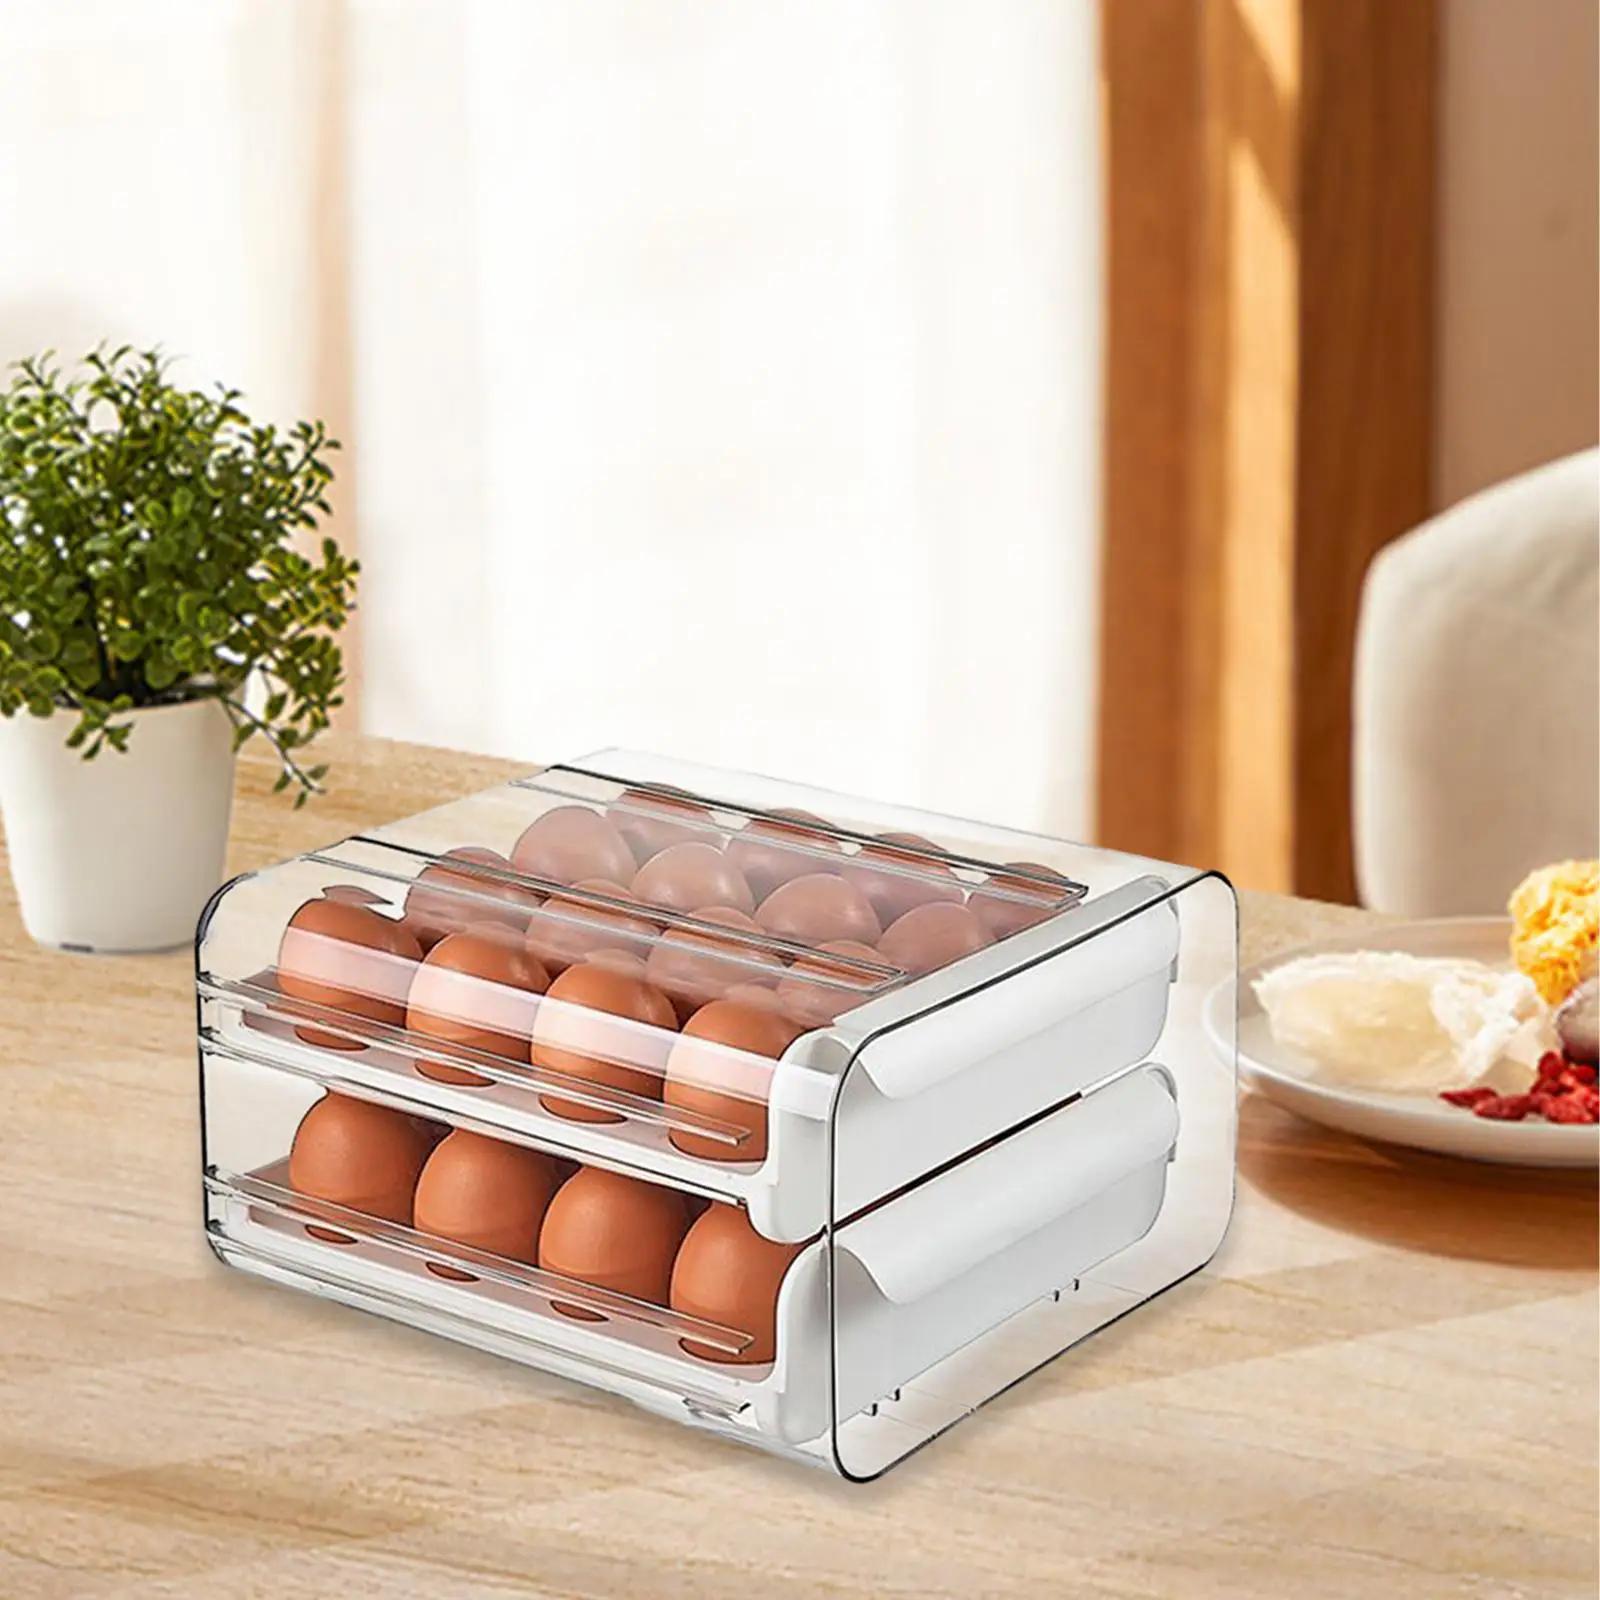 Drawer Type Eggs Holder Durable Large Capacity Pull Out Eggs Organizer Drawer for Fridge Cupboard Cabinet Pantry Refrigerator